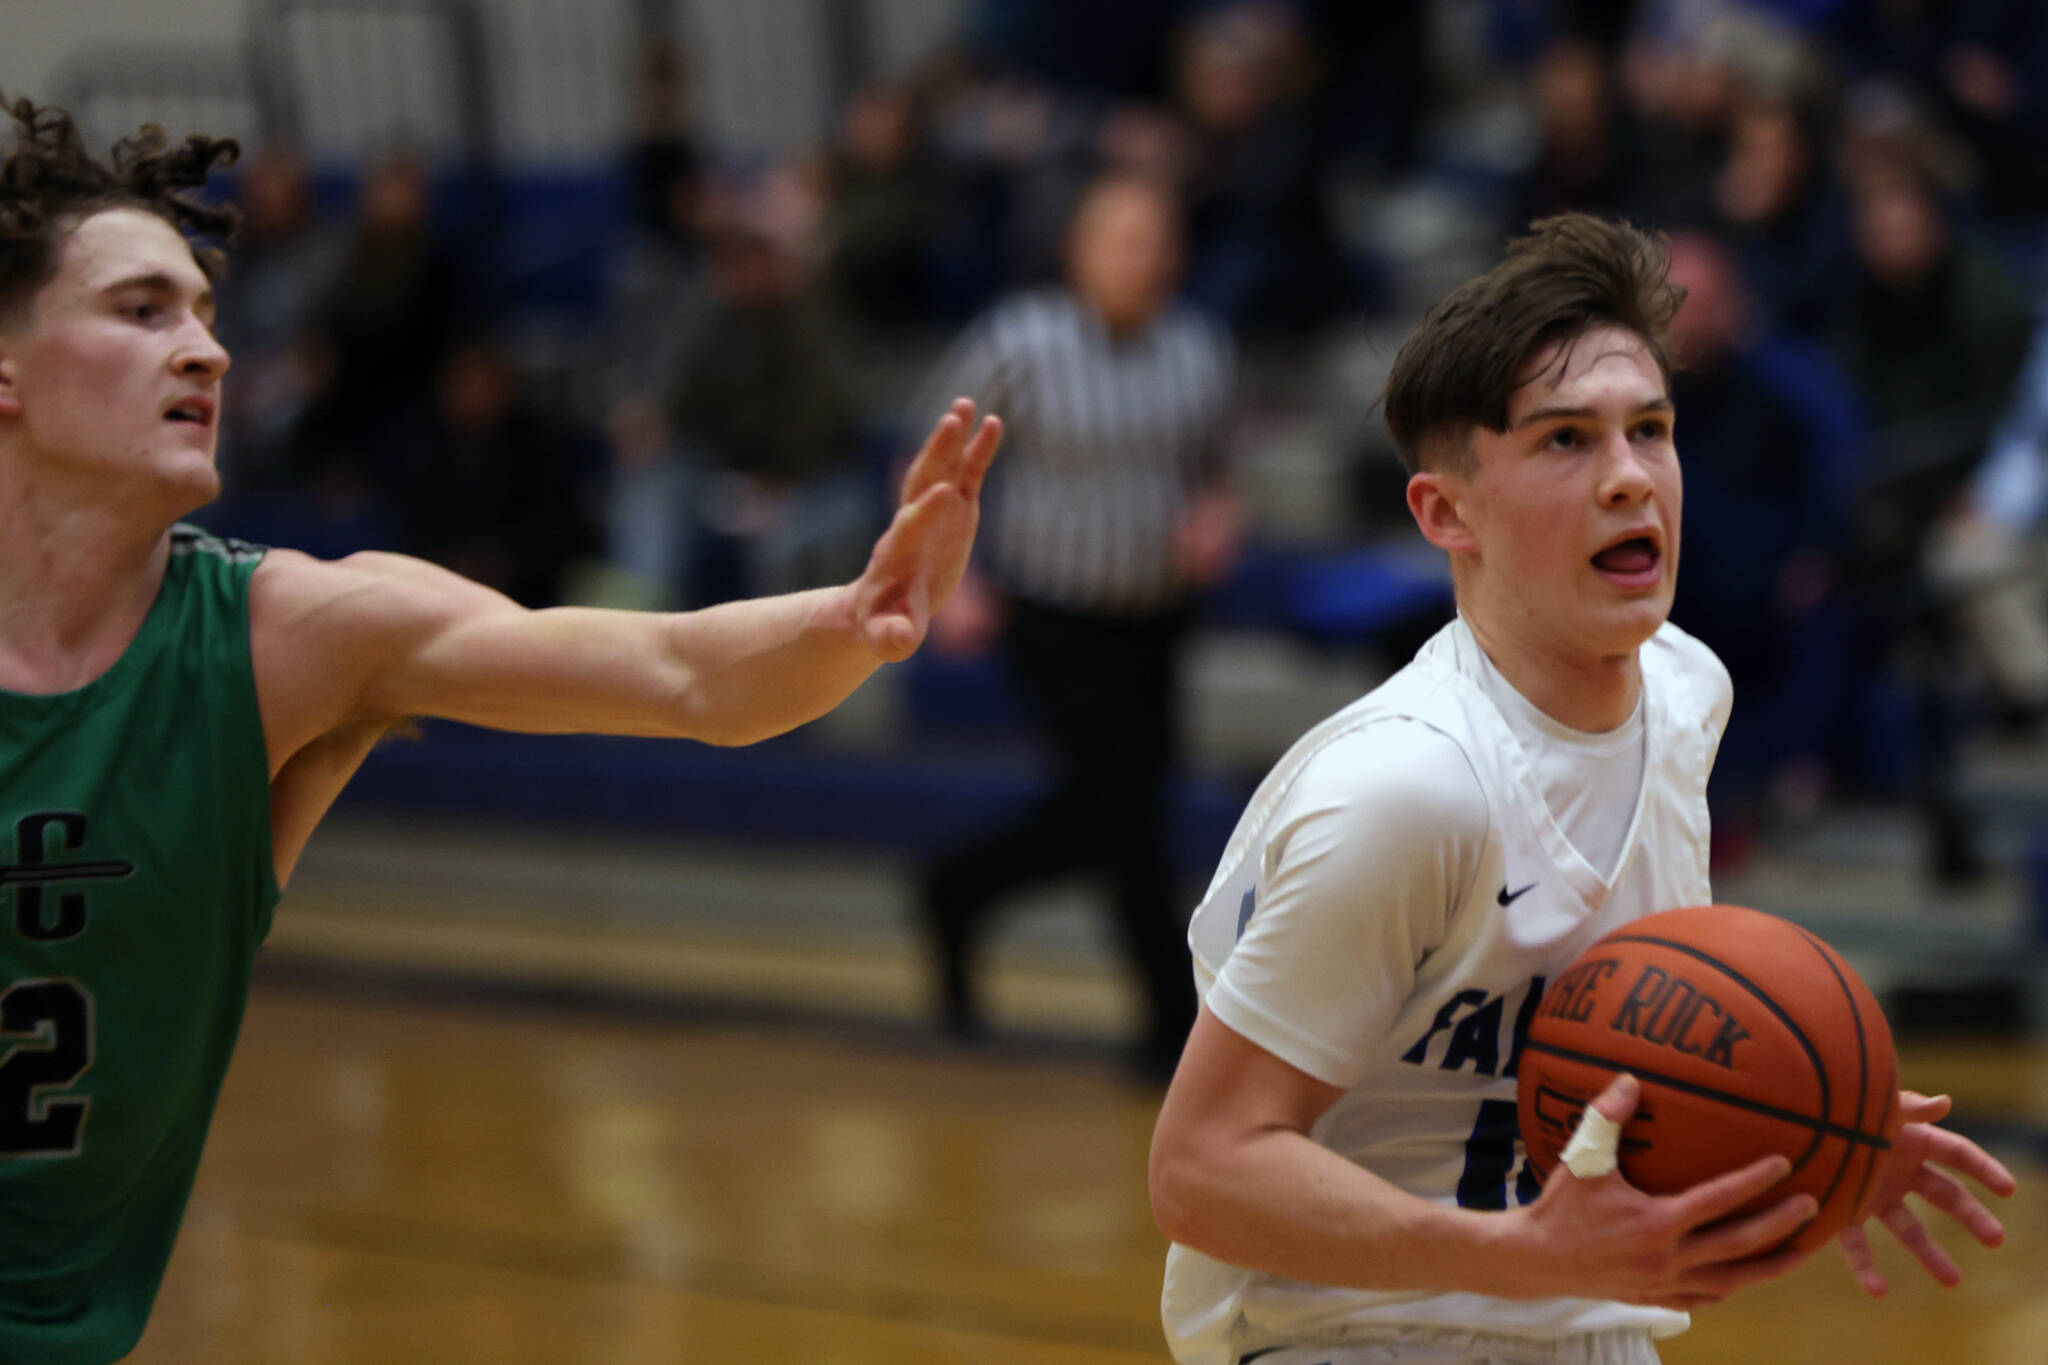 TMHS junior Samuel Lockhart makes his way past the outstretched arm of a Colony defender on his way to the hoop during a Thursday night home game. Lockhart would finish the game with a team-leading 17 points in the 52-41 loss. (Ben Hohenstatt / Juneau Empire)